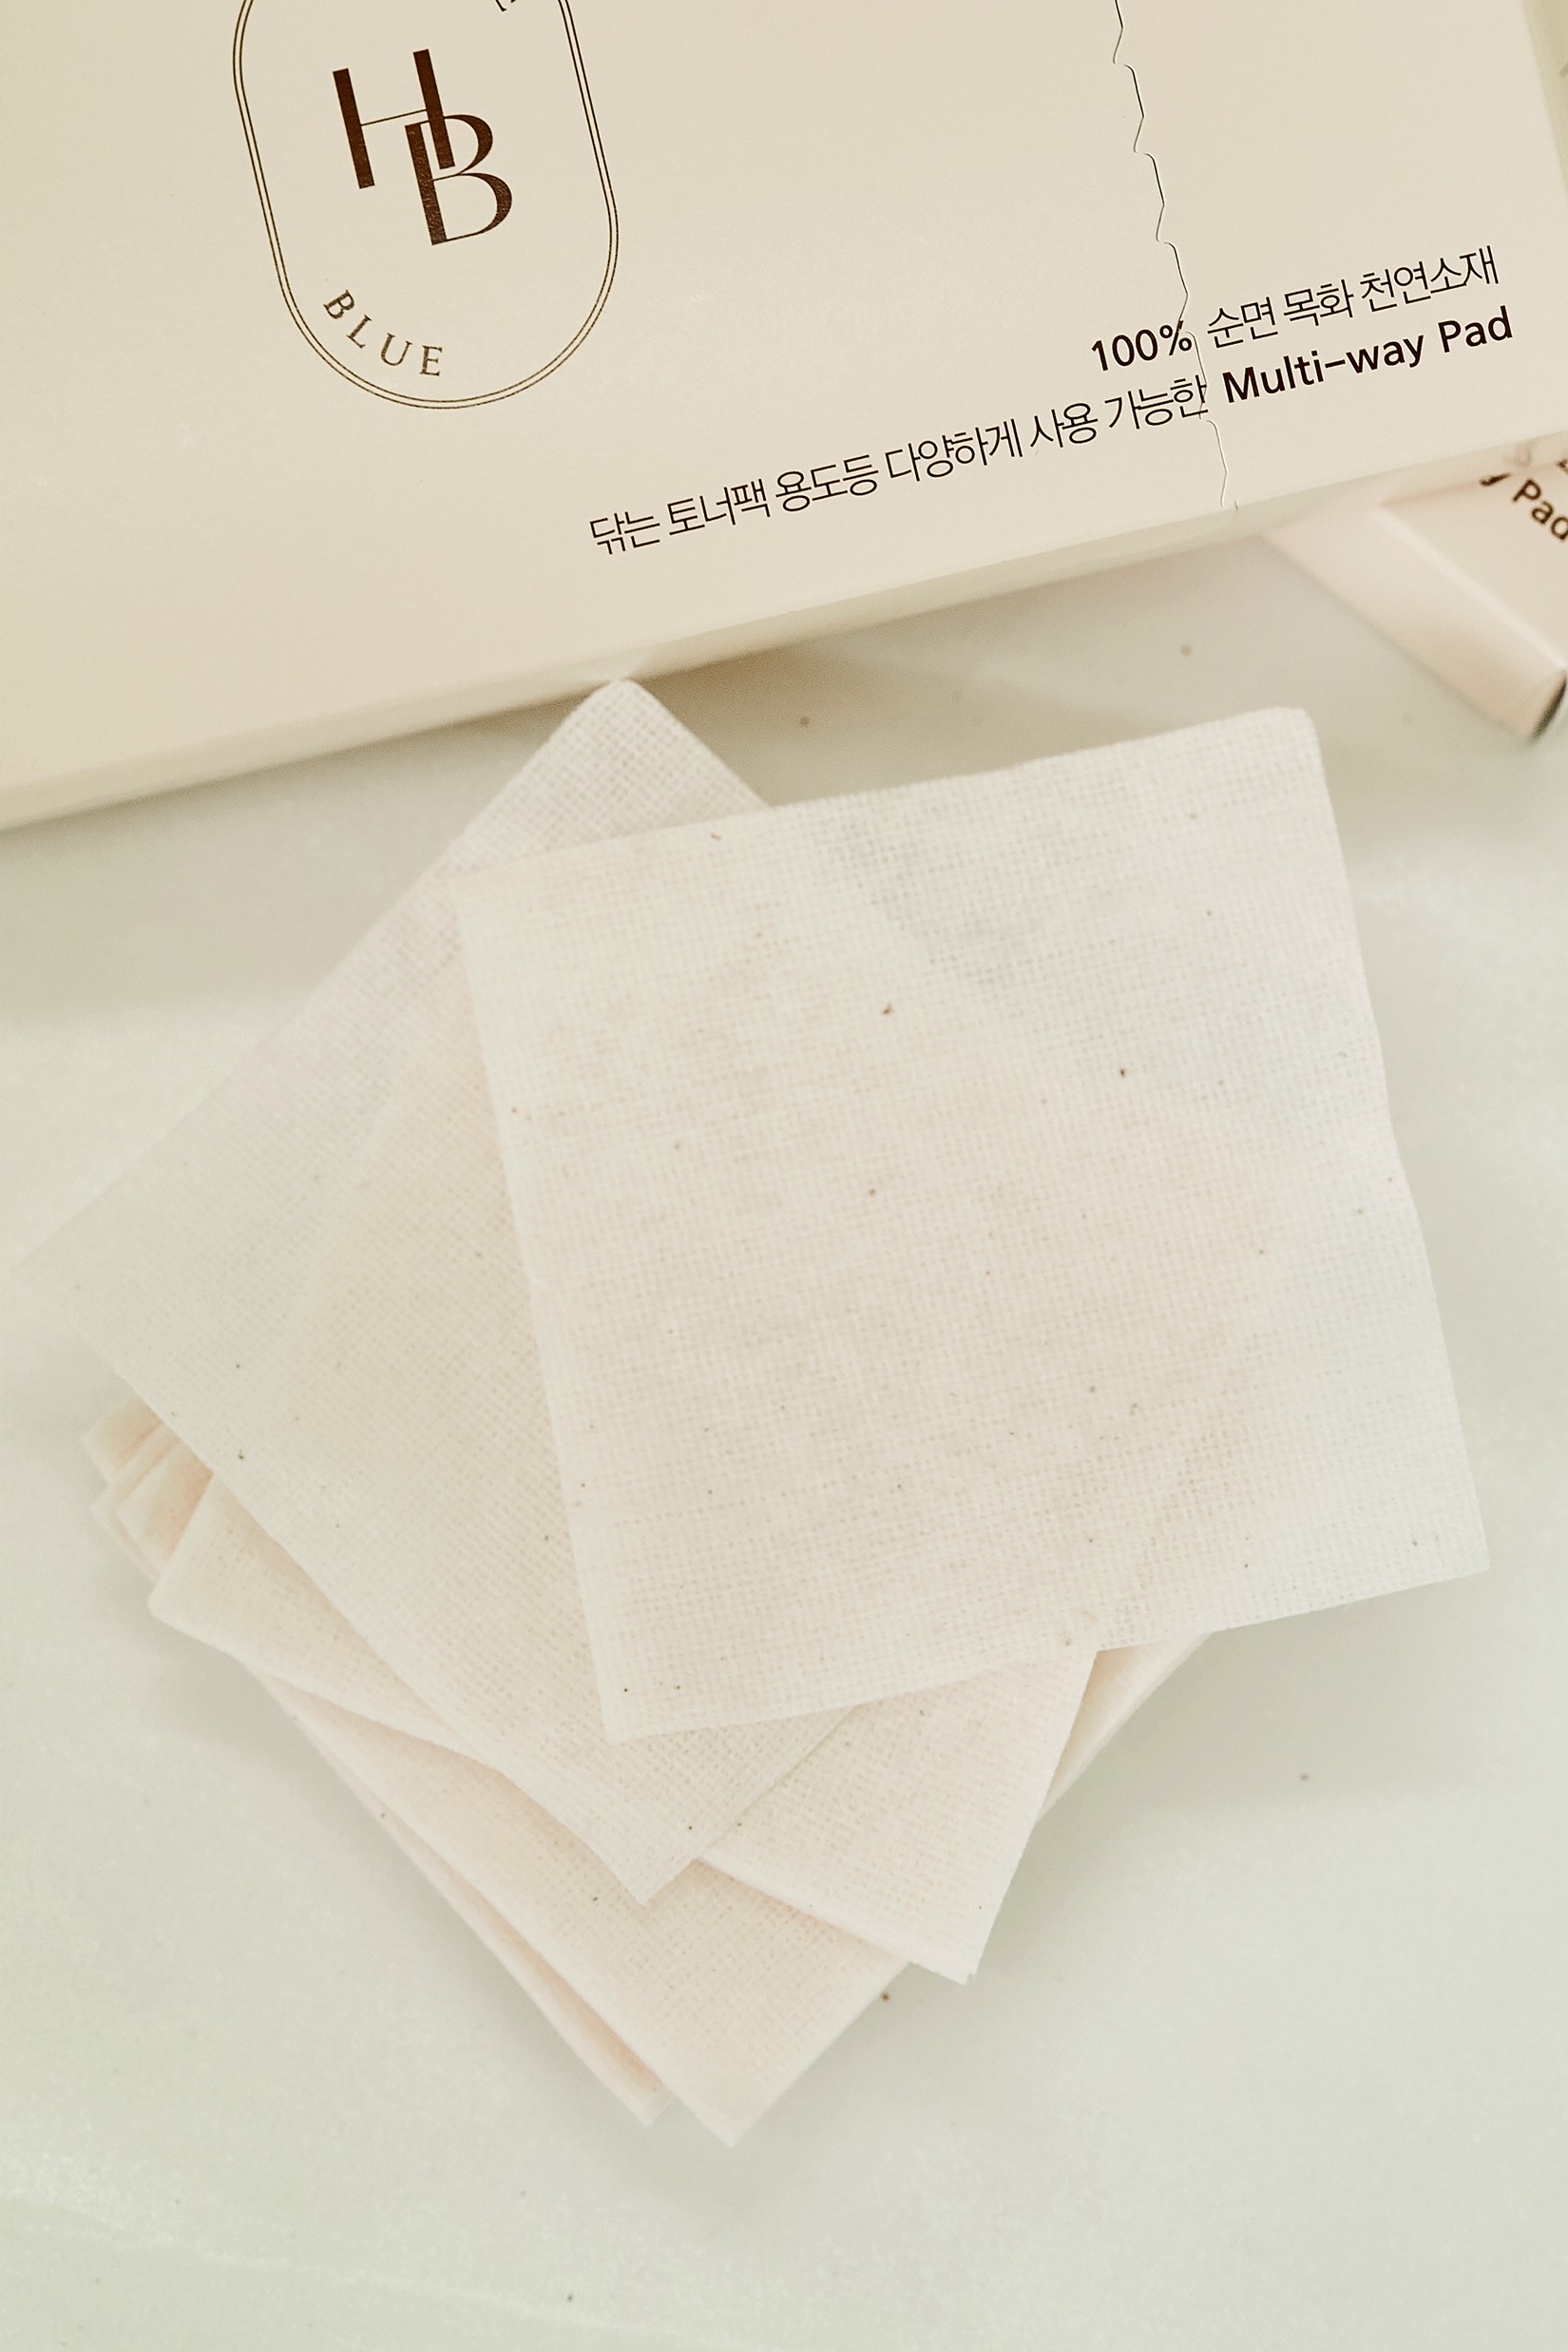 Multyway Unbleached Biodegradation 100% Cotton Pad